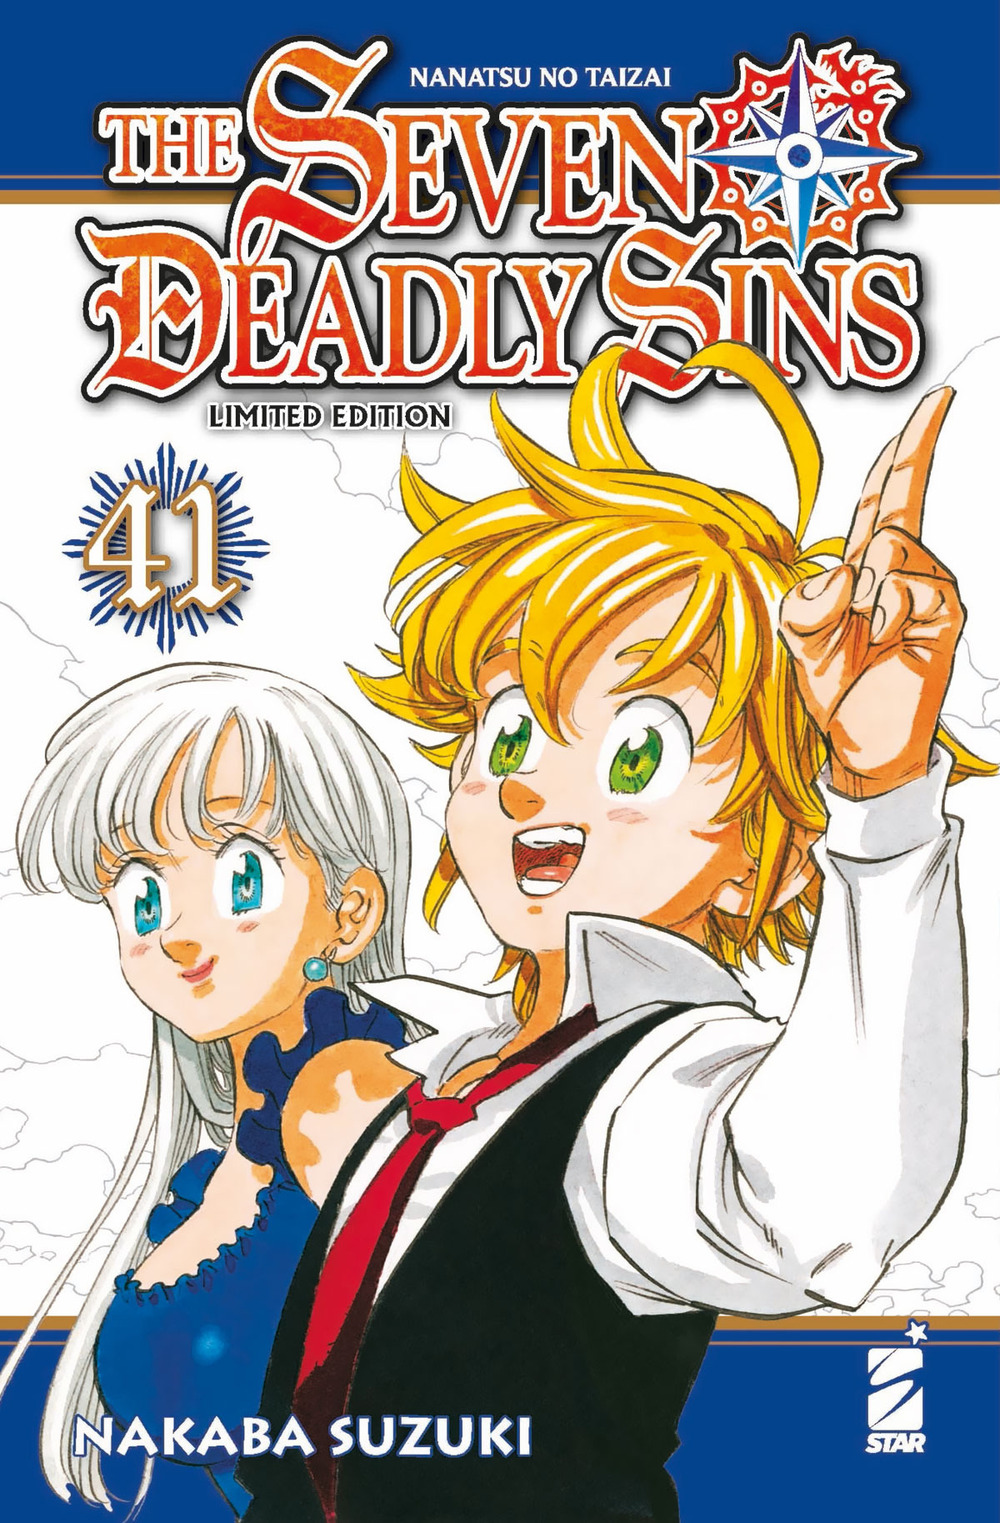 The seven deadly sins. Limited edition. Vol. 41